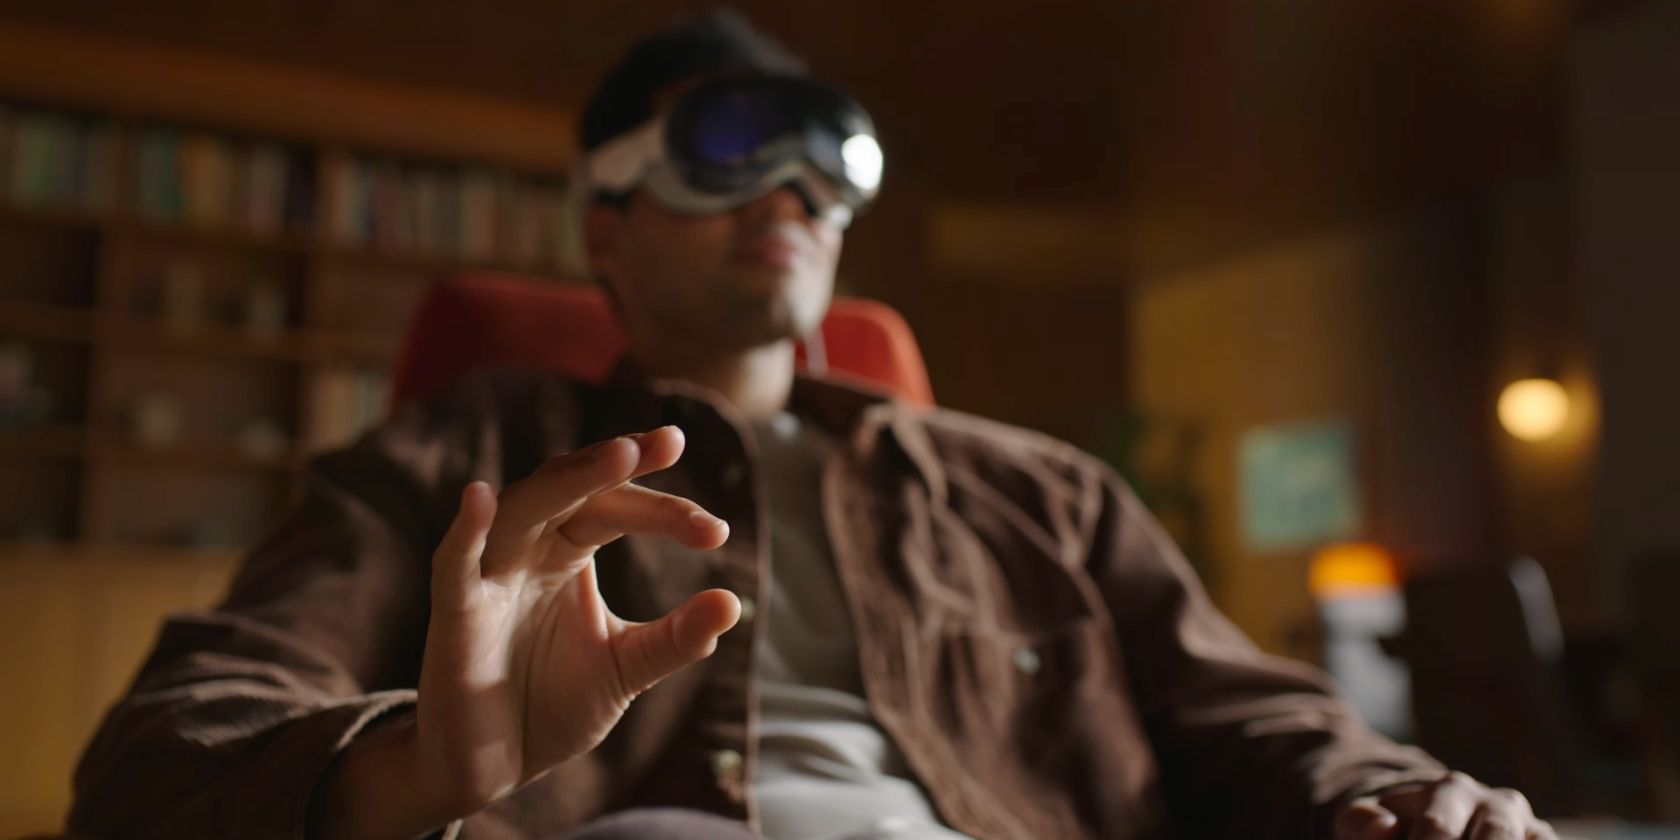 Young man wearing Apple's Vision Pro AR/VR headset, performing the pinch gesture